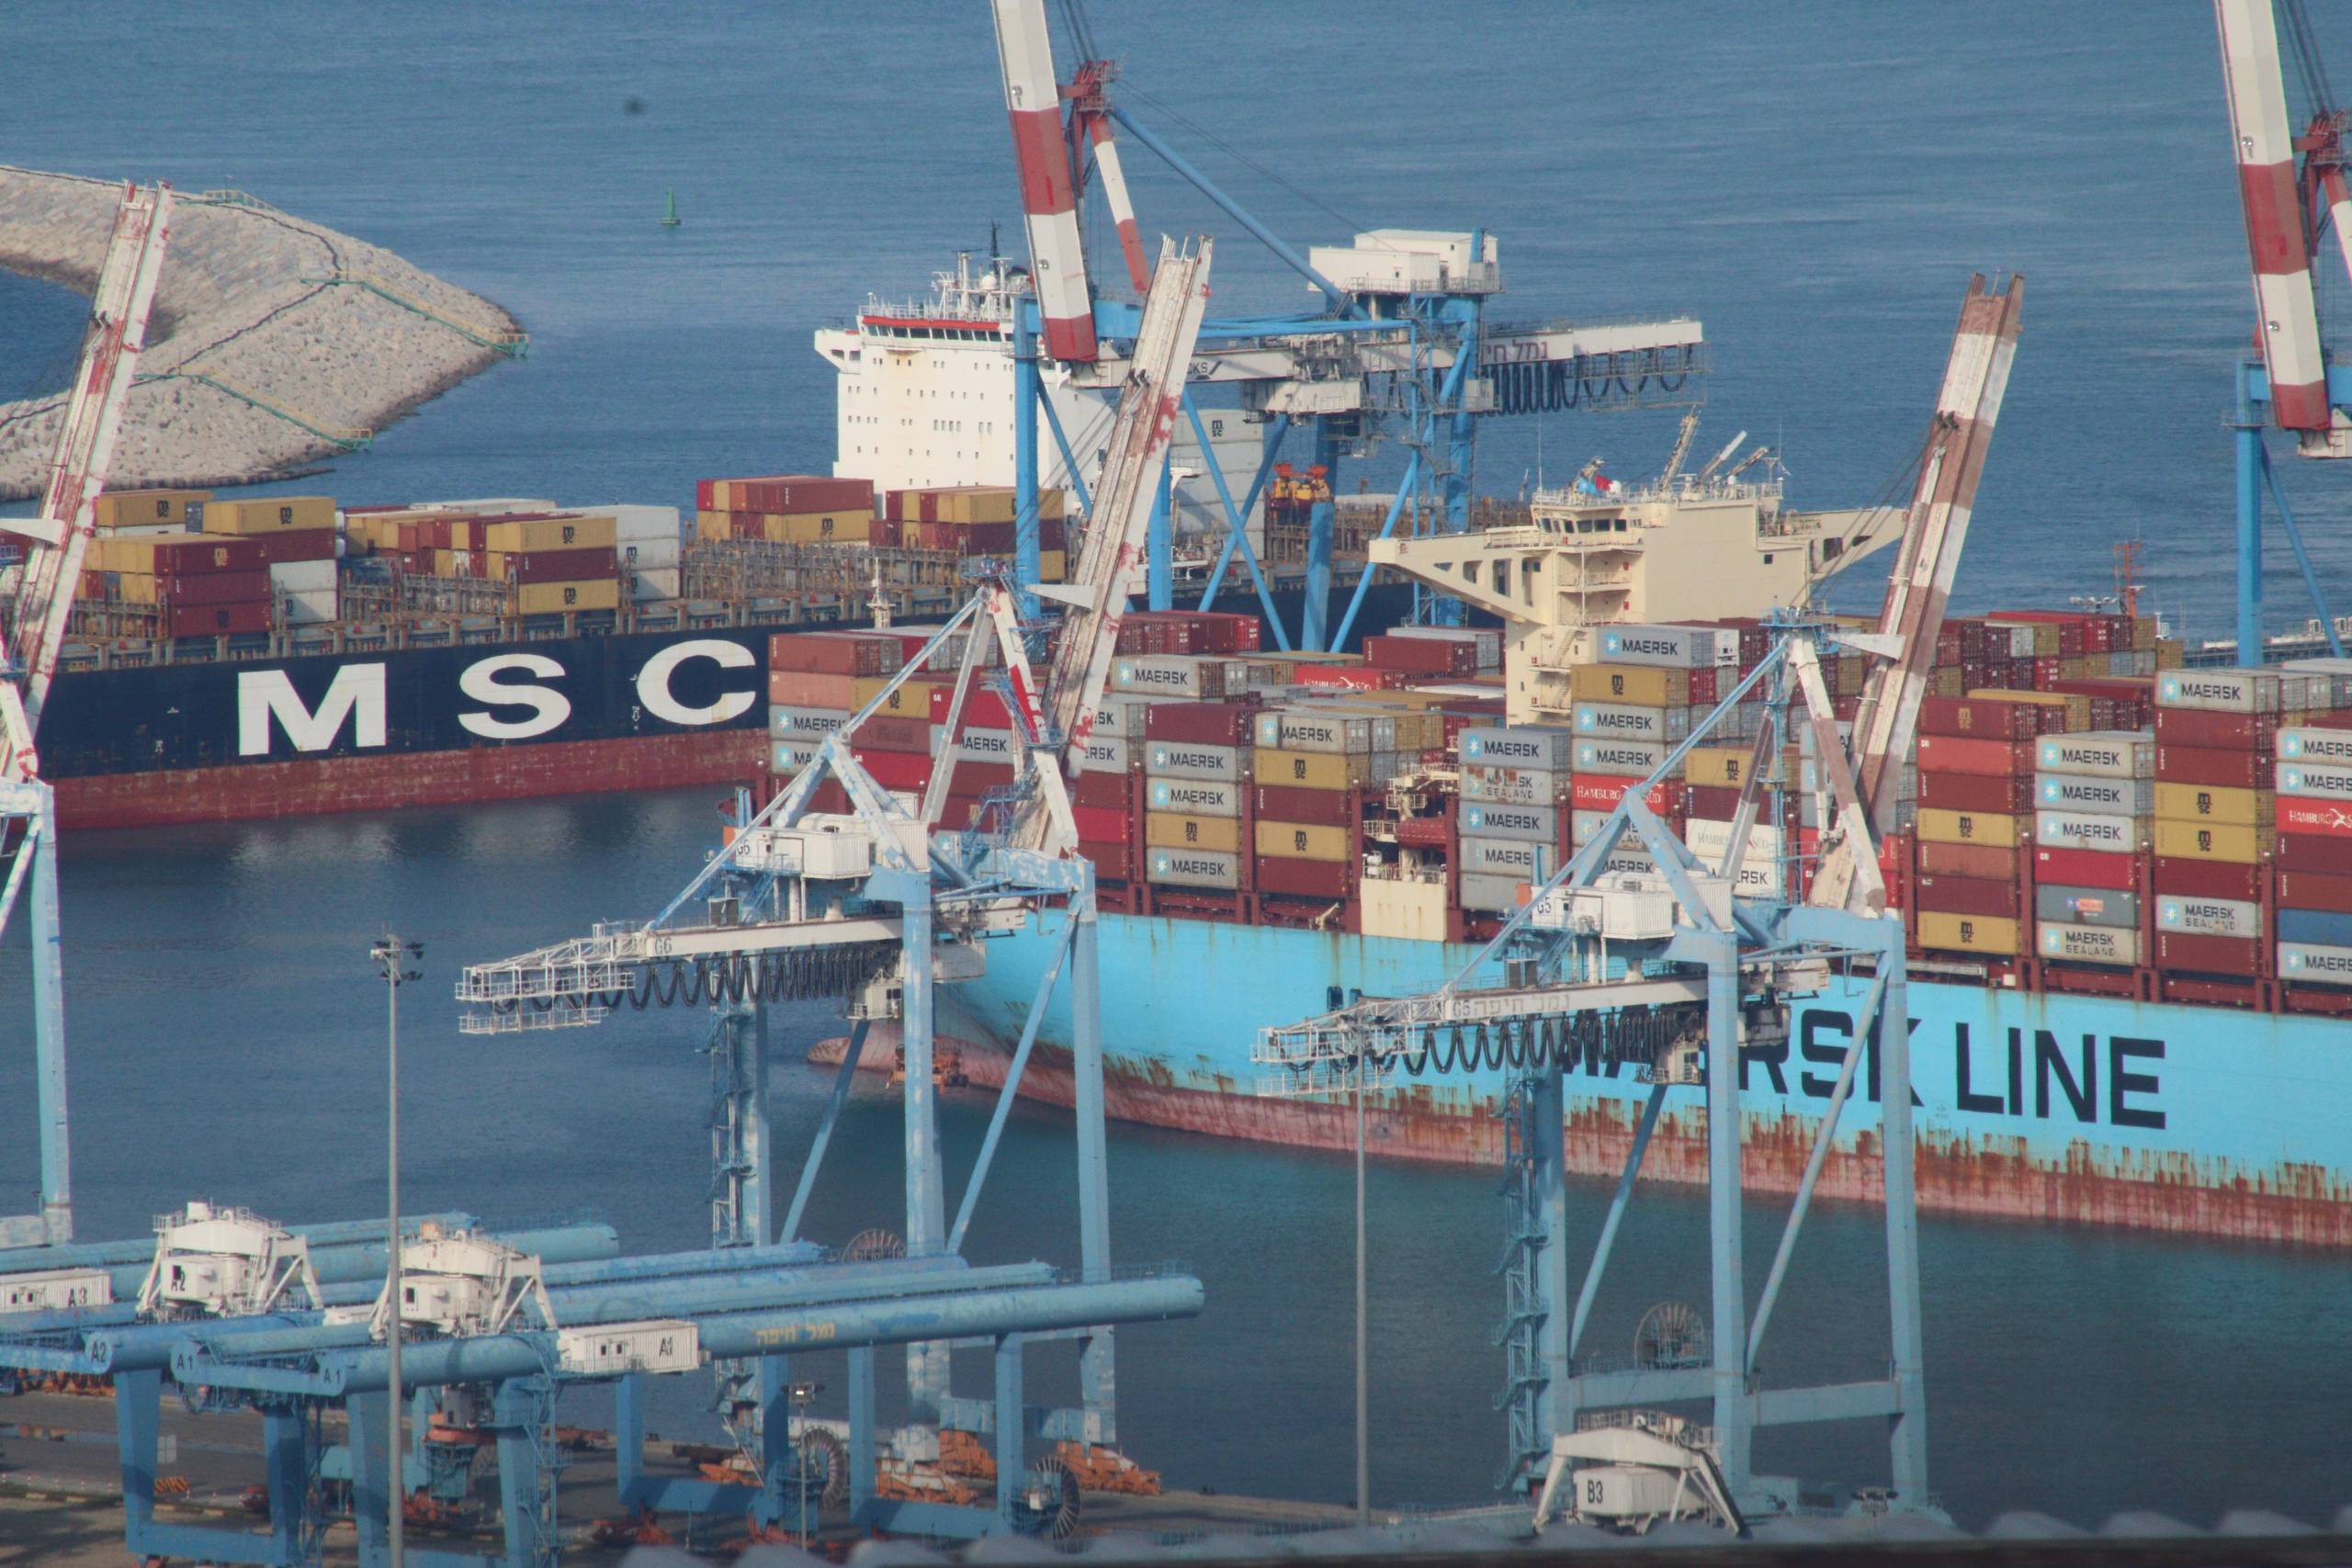 Maersk and Mediterranean Shipping Company (MSC), the two largest shipping lines in the world, are on collision course